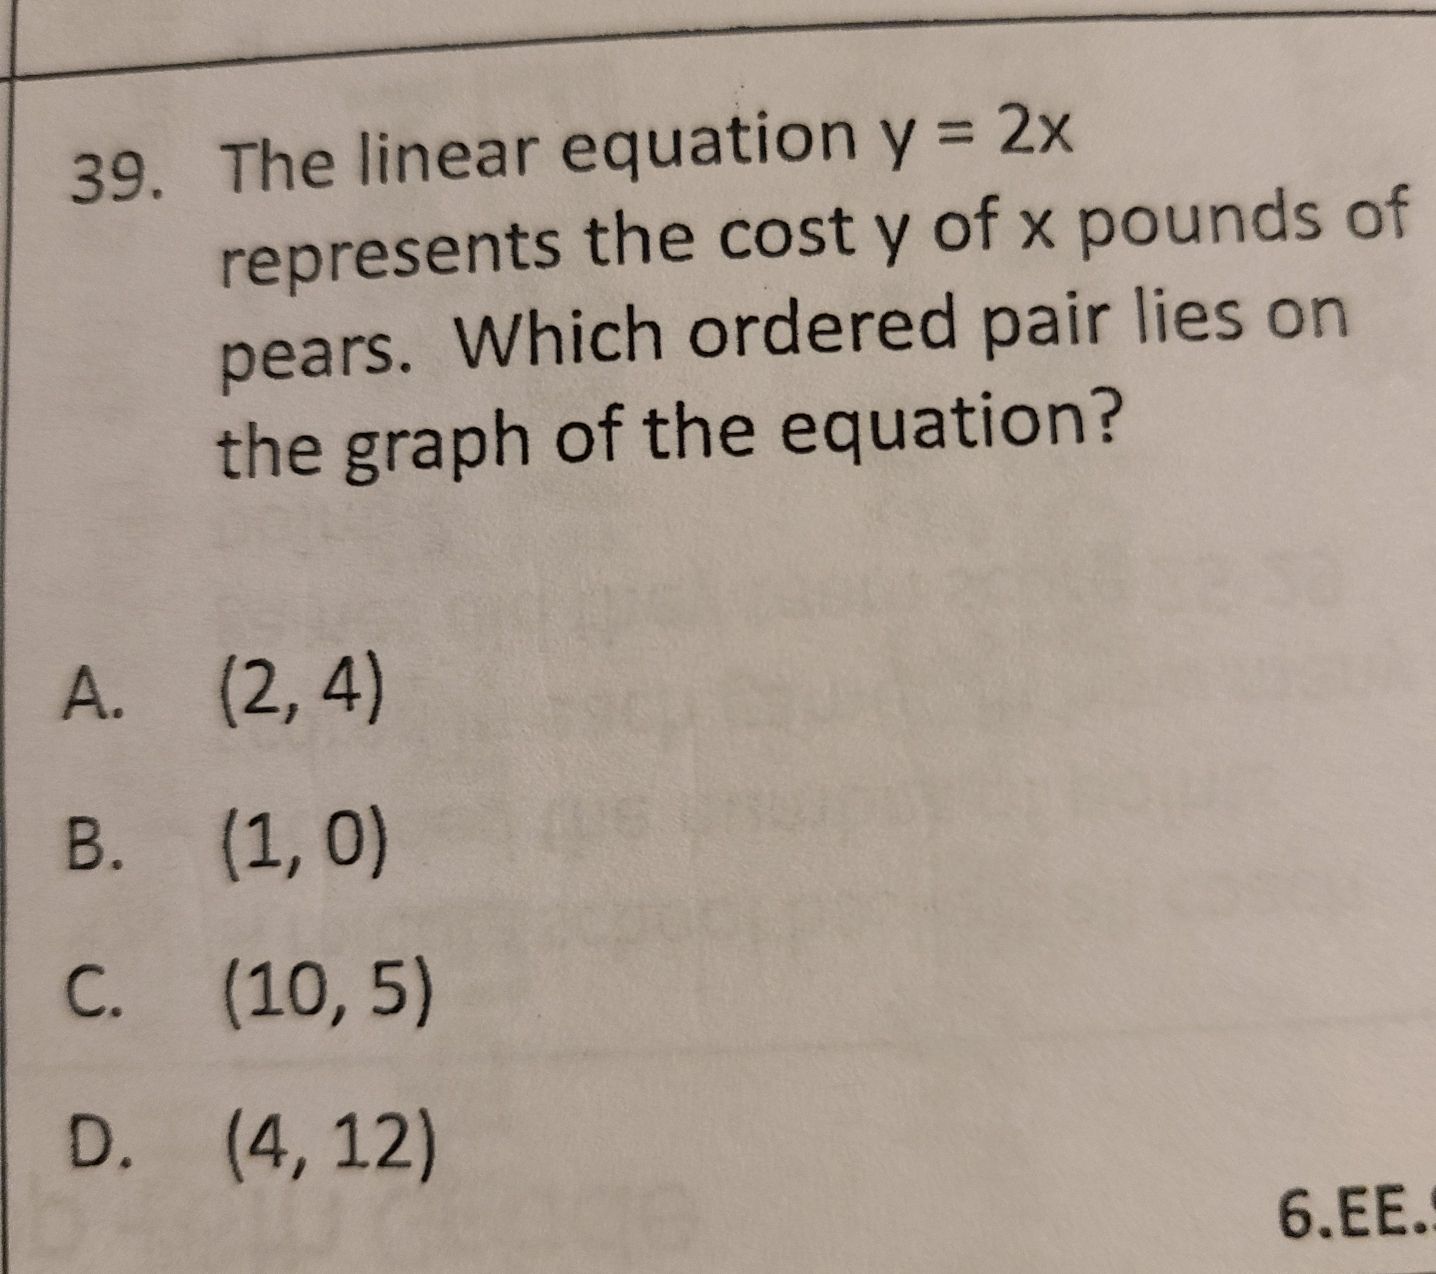 39. The linear equation \( y = 2 x \) represents t...